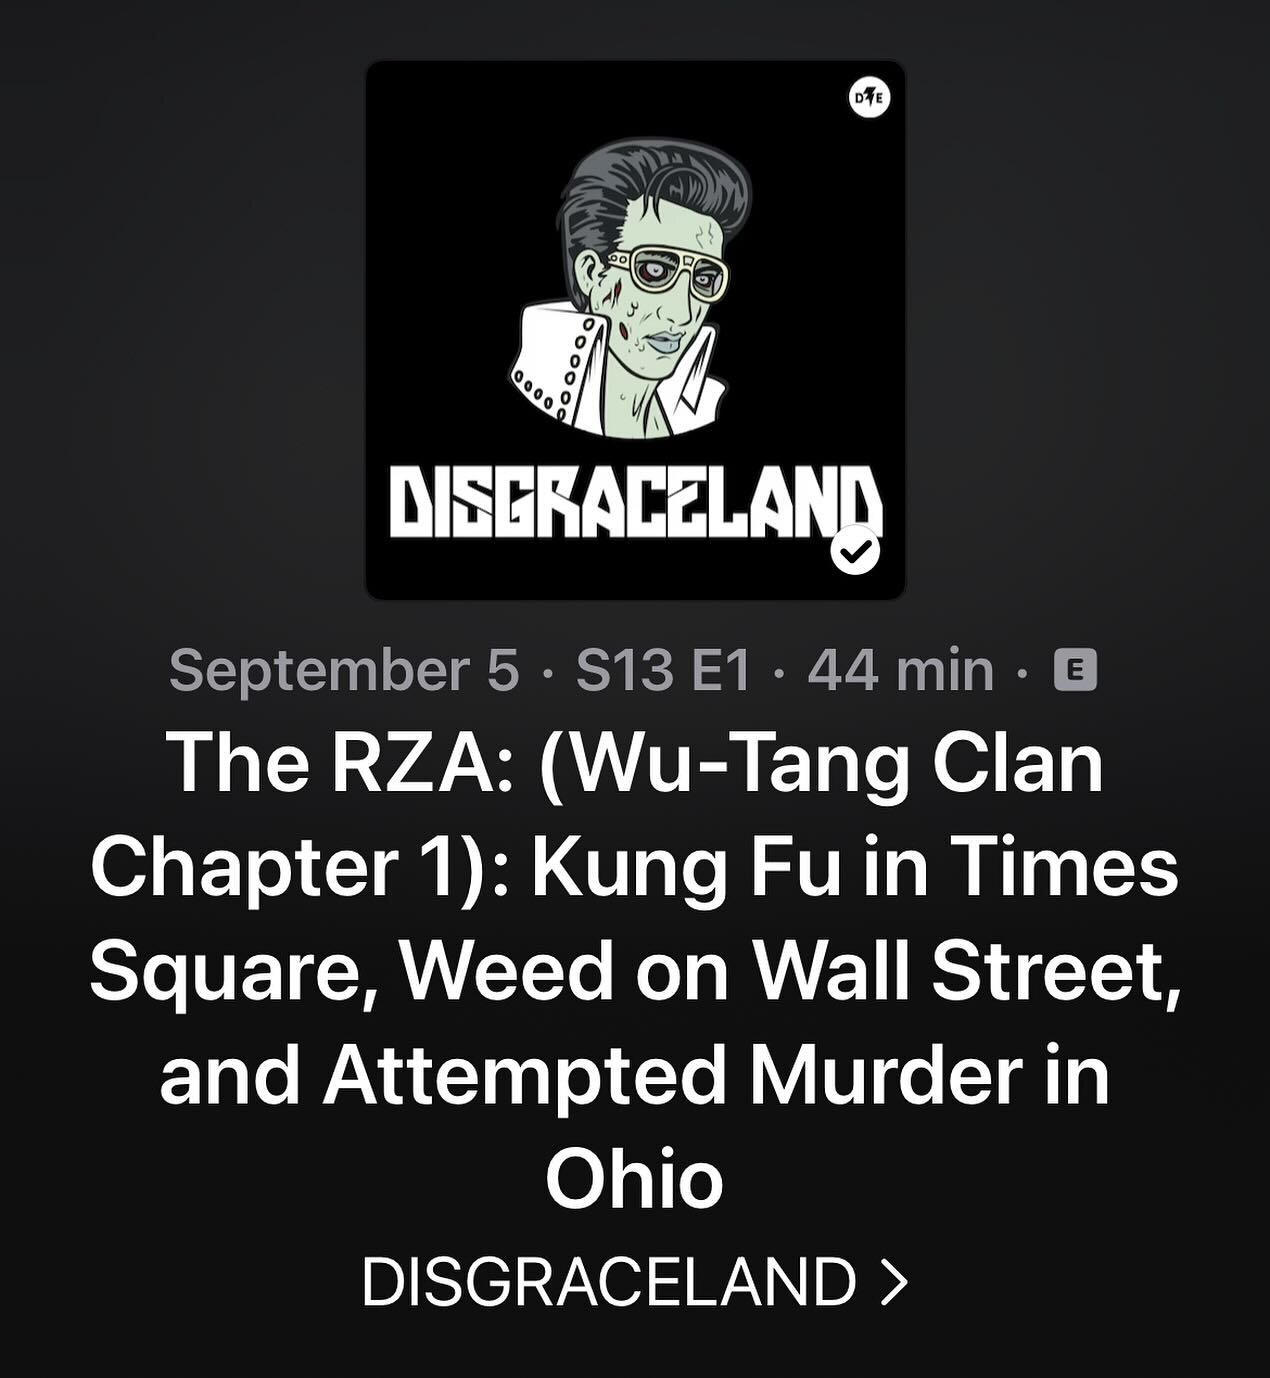 No new episode coming from us anytime soon (sorry 😭), just checking in to say I&rsquo;ve really been digging @disgracelandpod &lsquo;s series on the mighty @wutangclan .
Check it out if you&rsquo;re a fan of the Wu! 🙏